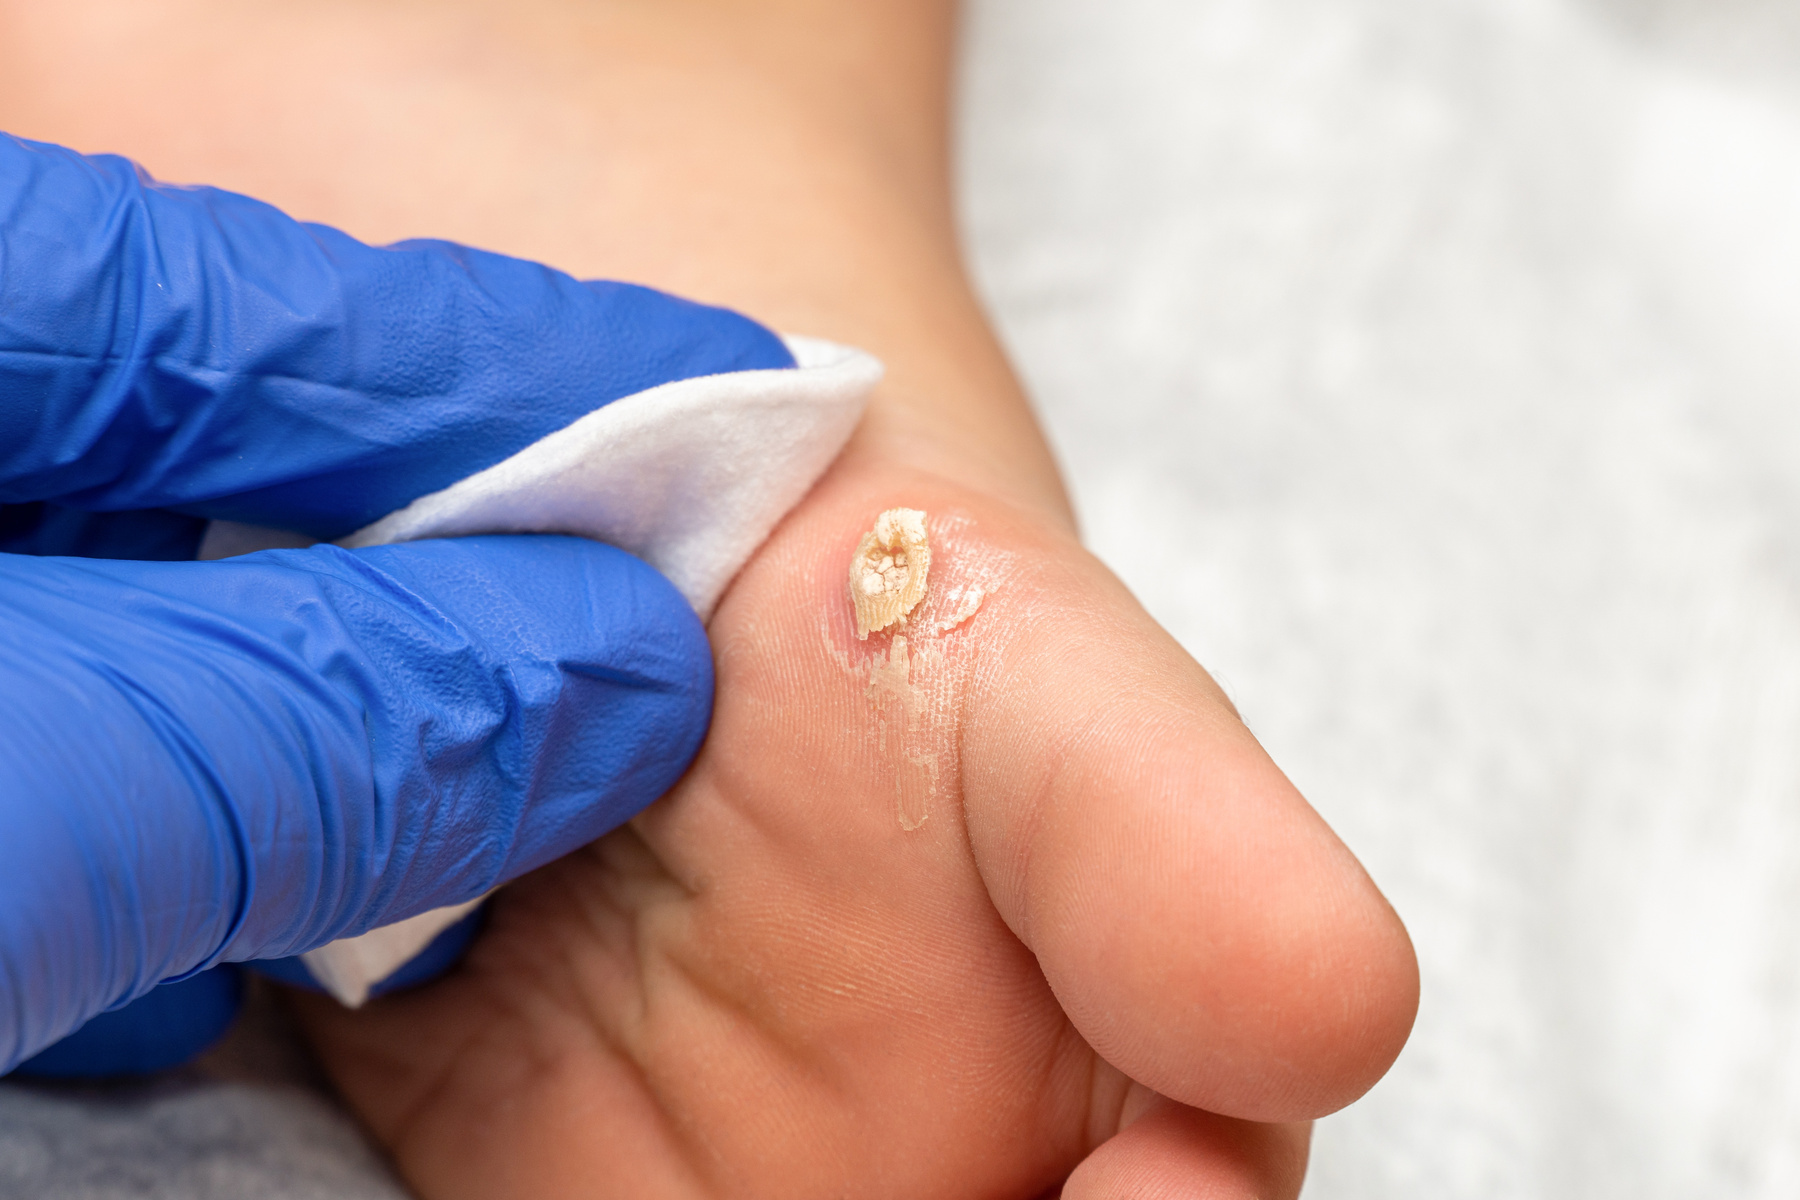 Healing treatment of cracked, dry wart, calluses on the child foot sole